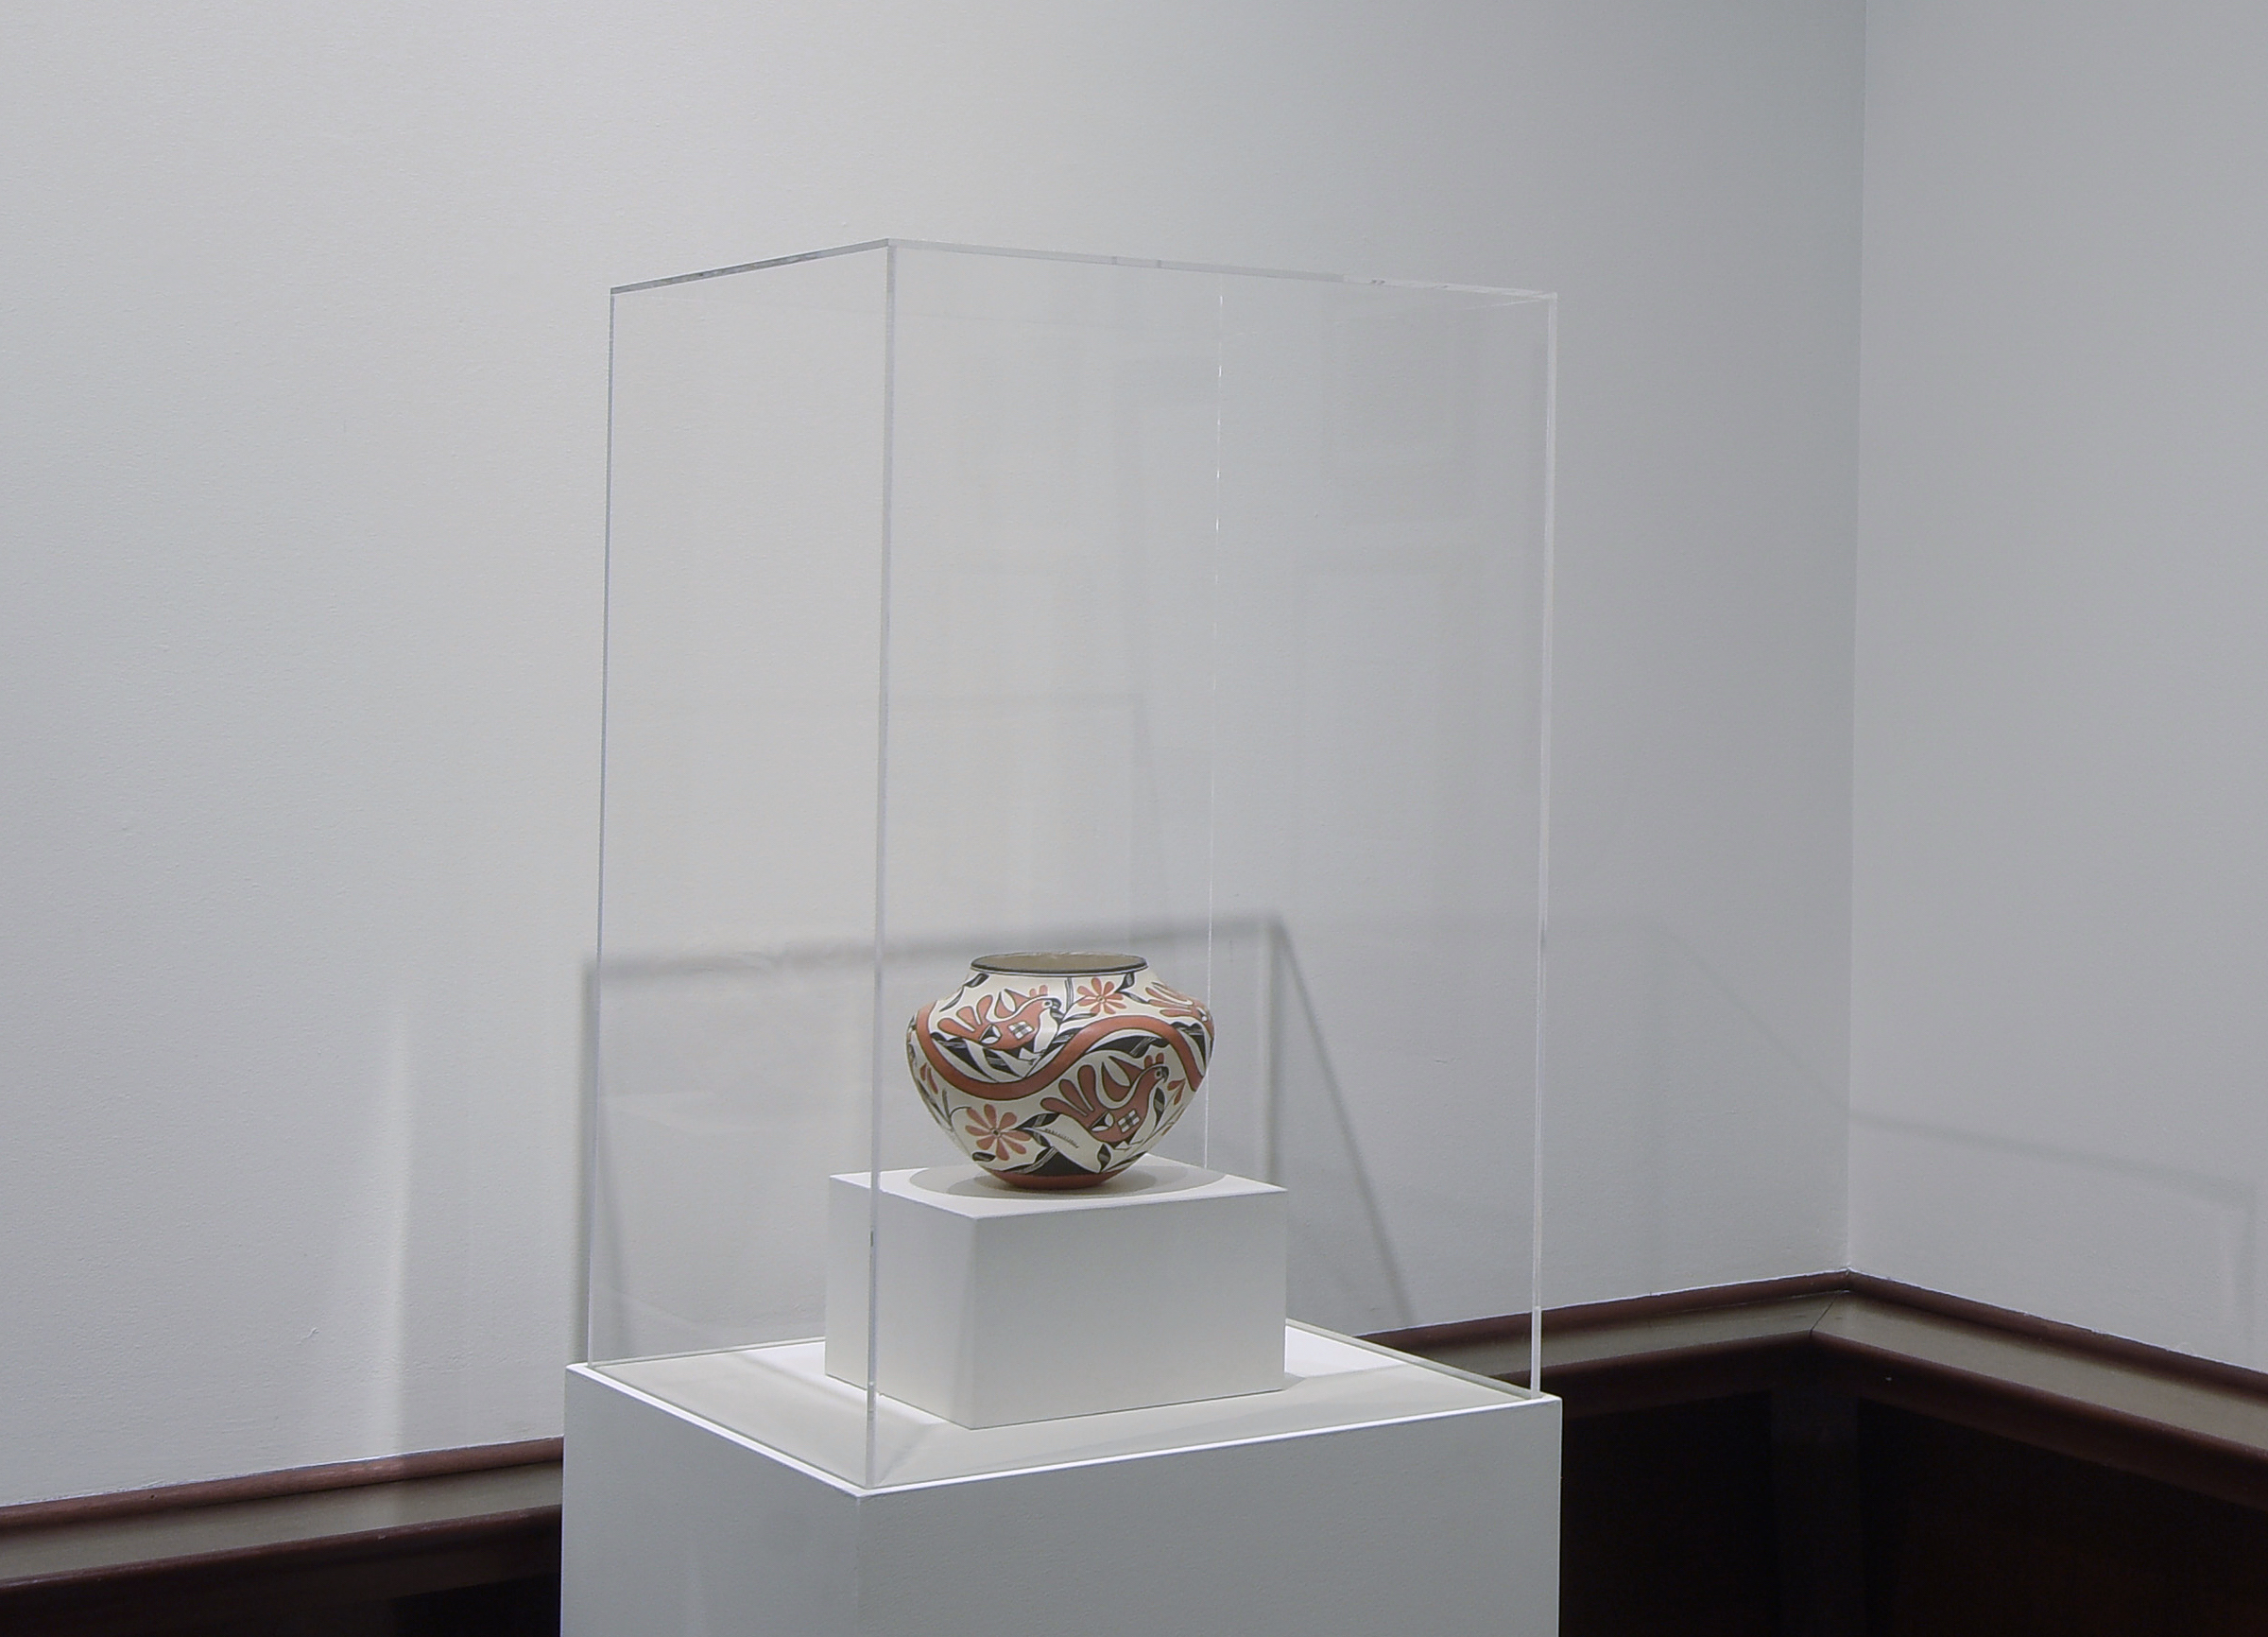 A traditional handmade and painted pot is sitting in a glass case in a MAM gallery.